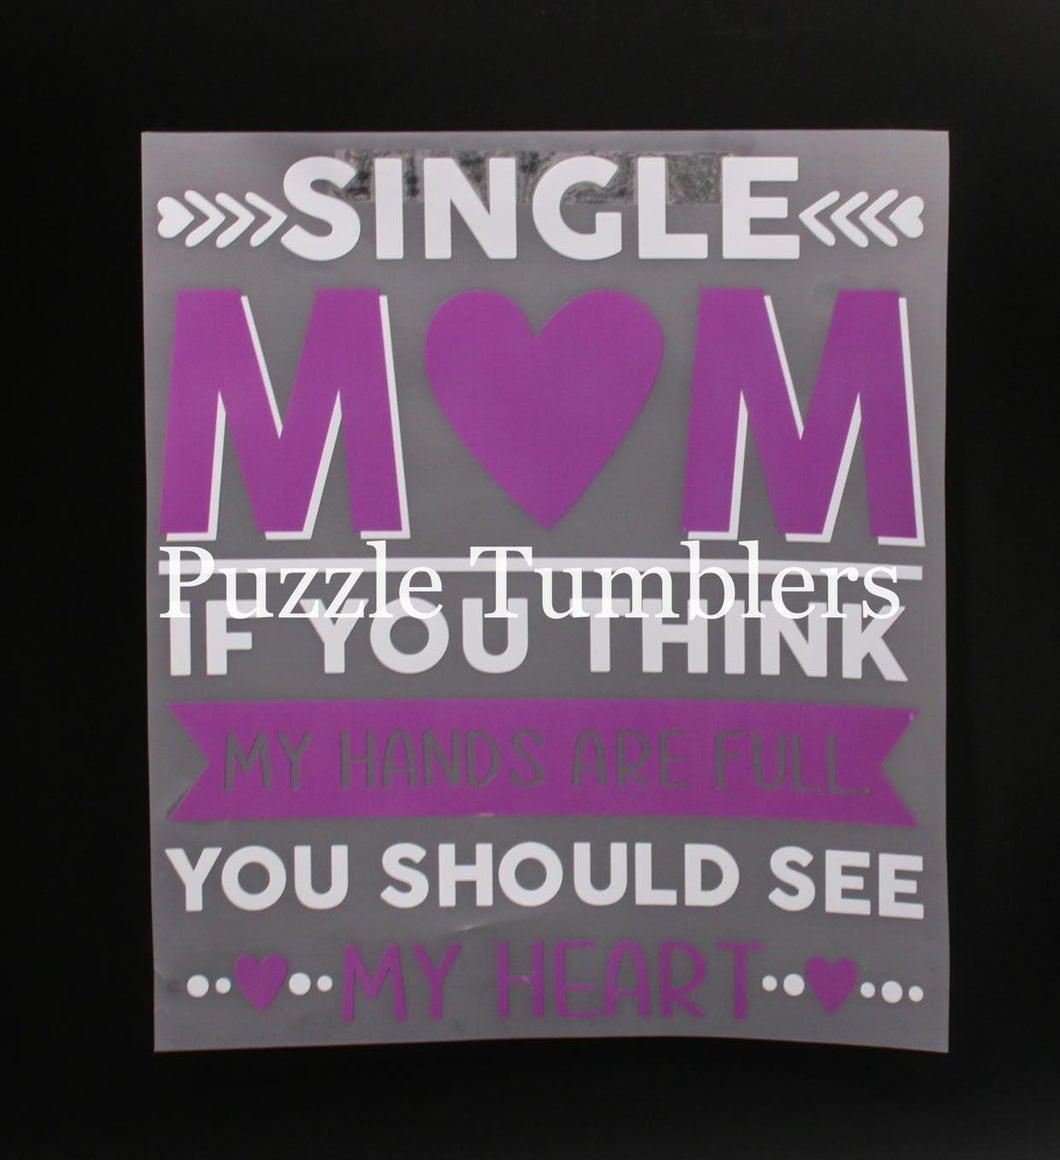 SINGLE MOM, IF YOU THINK MY HANDS ARE FULL - YOU SHOULD SEE MY HEART - T-Shirt Transfer $6.50/EACH